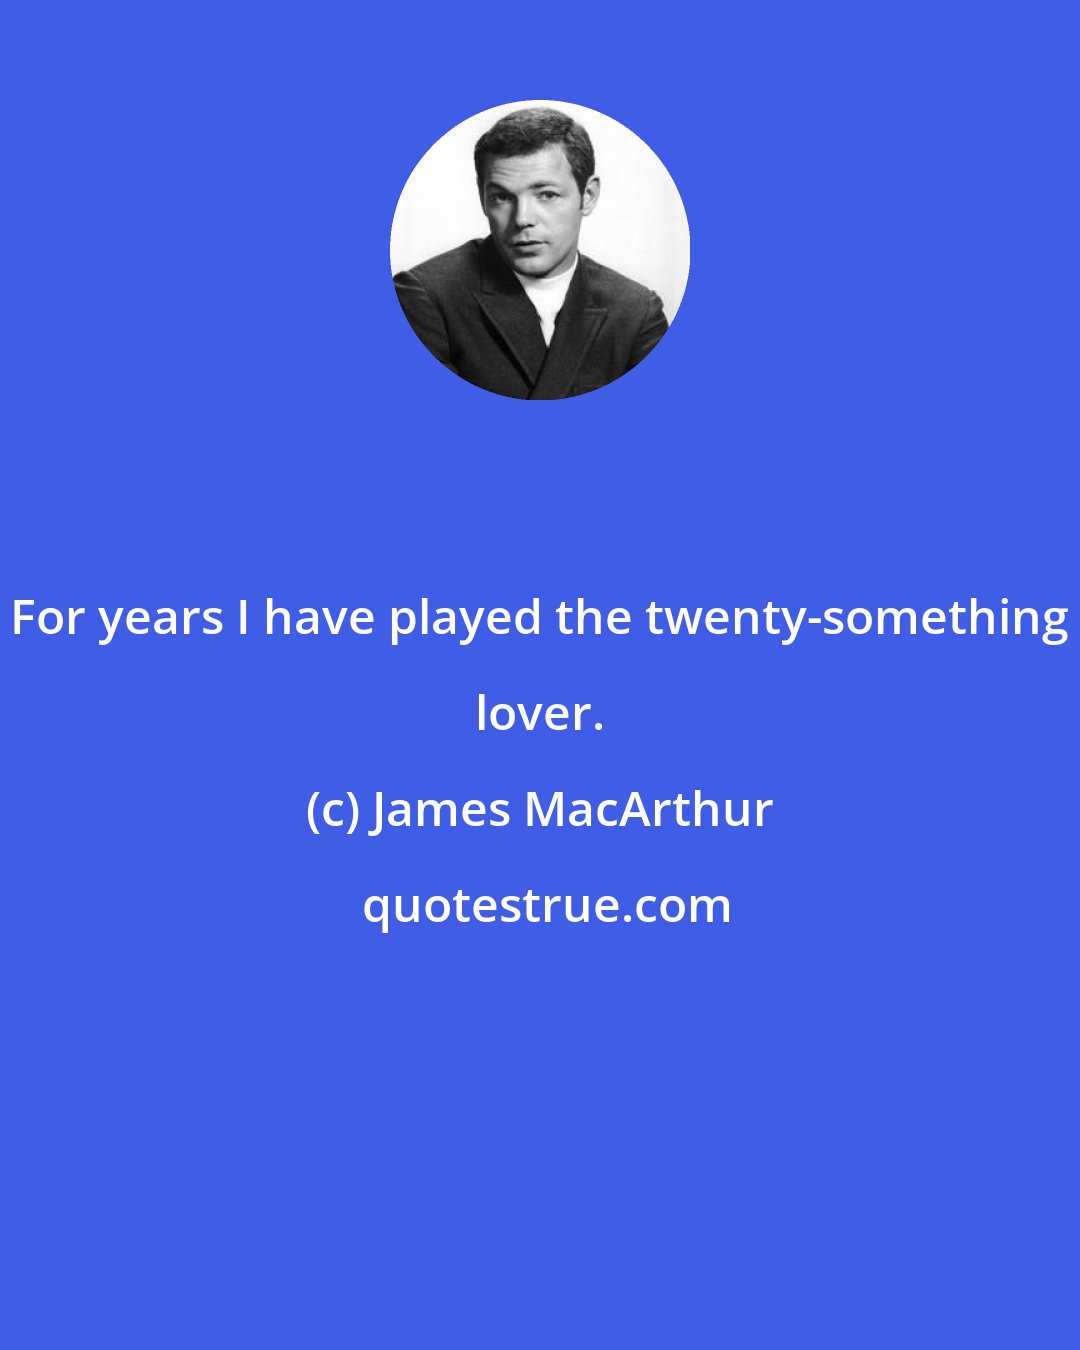 James MacArthur: For years I have played the twenty-something lover.